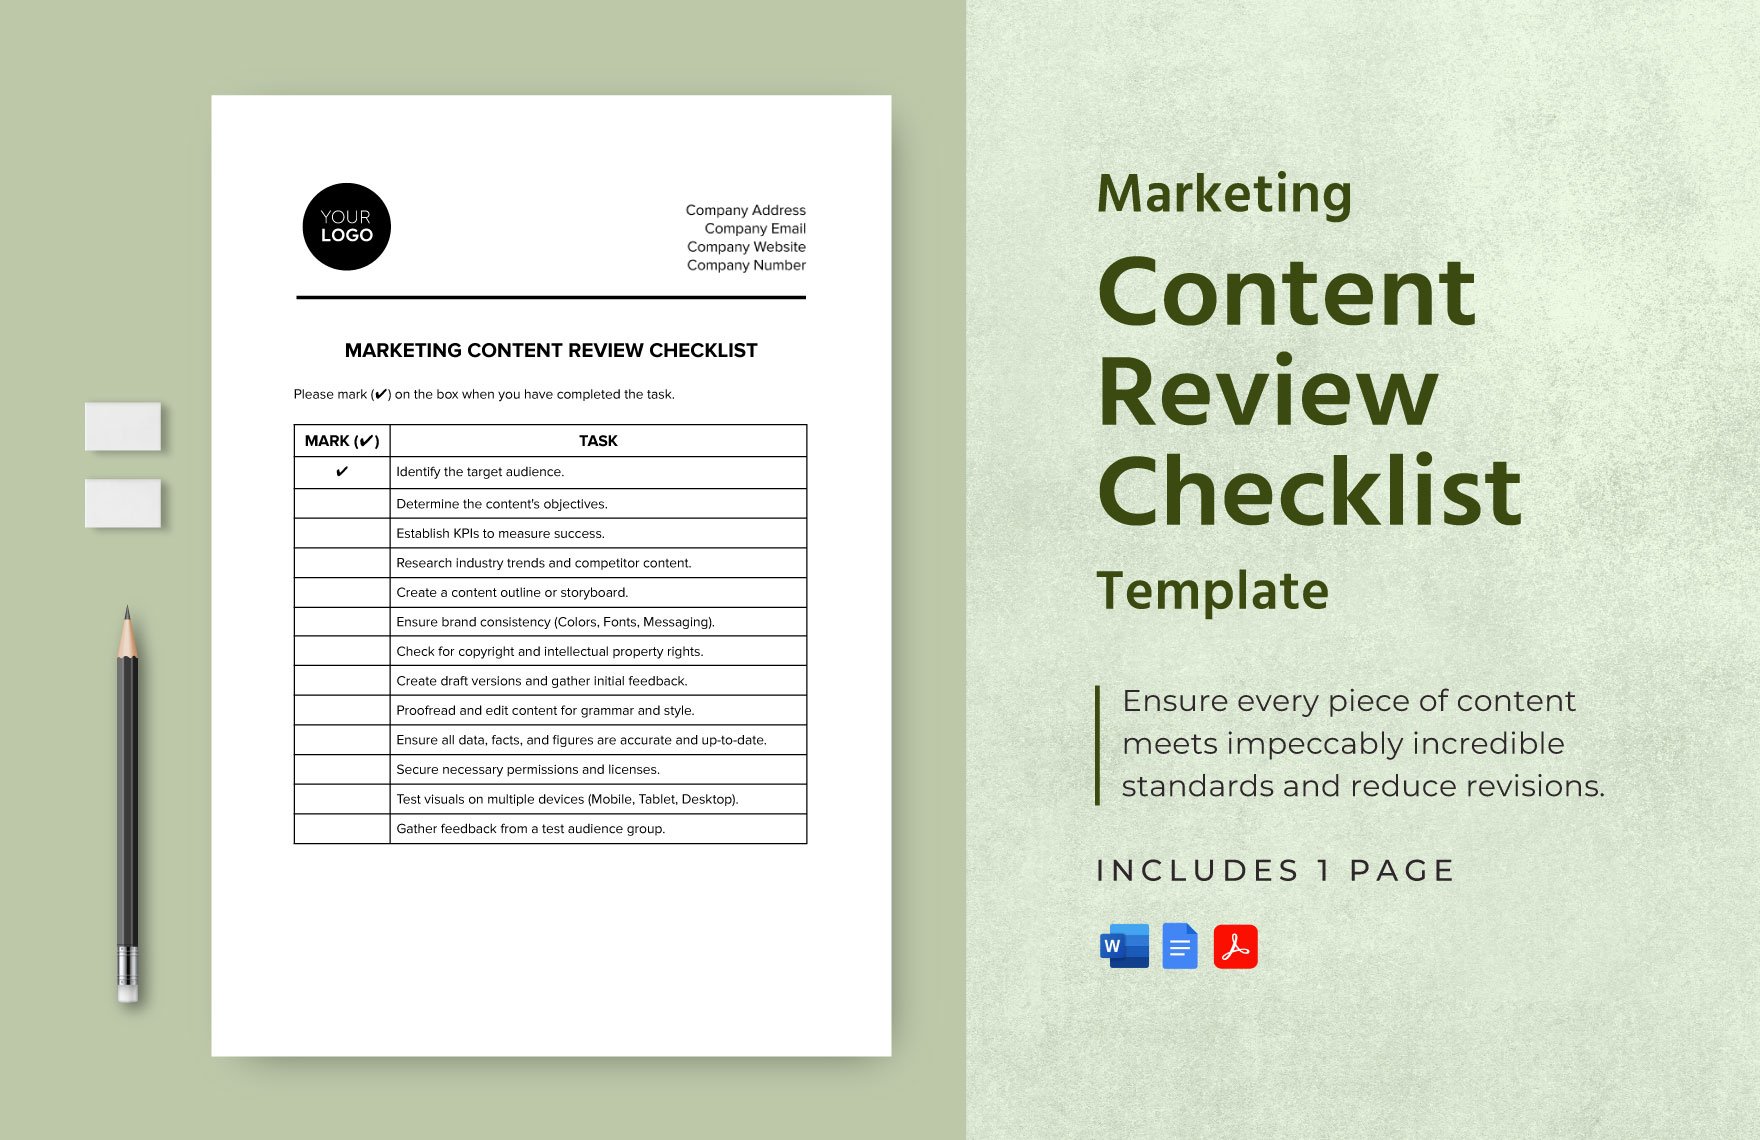 Marketing Content Review Checklist Template in Word, Google Docs, PDF